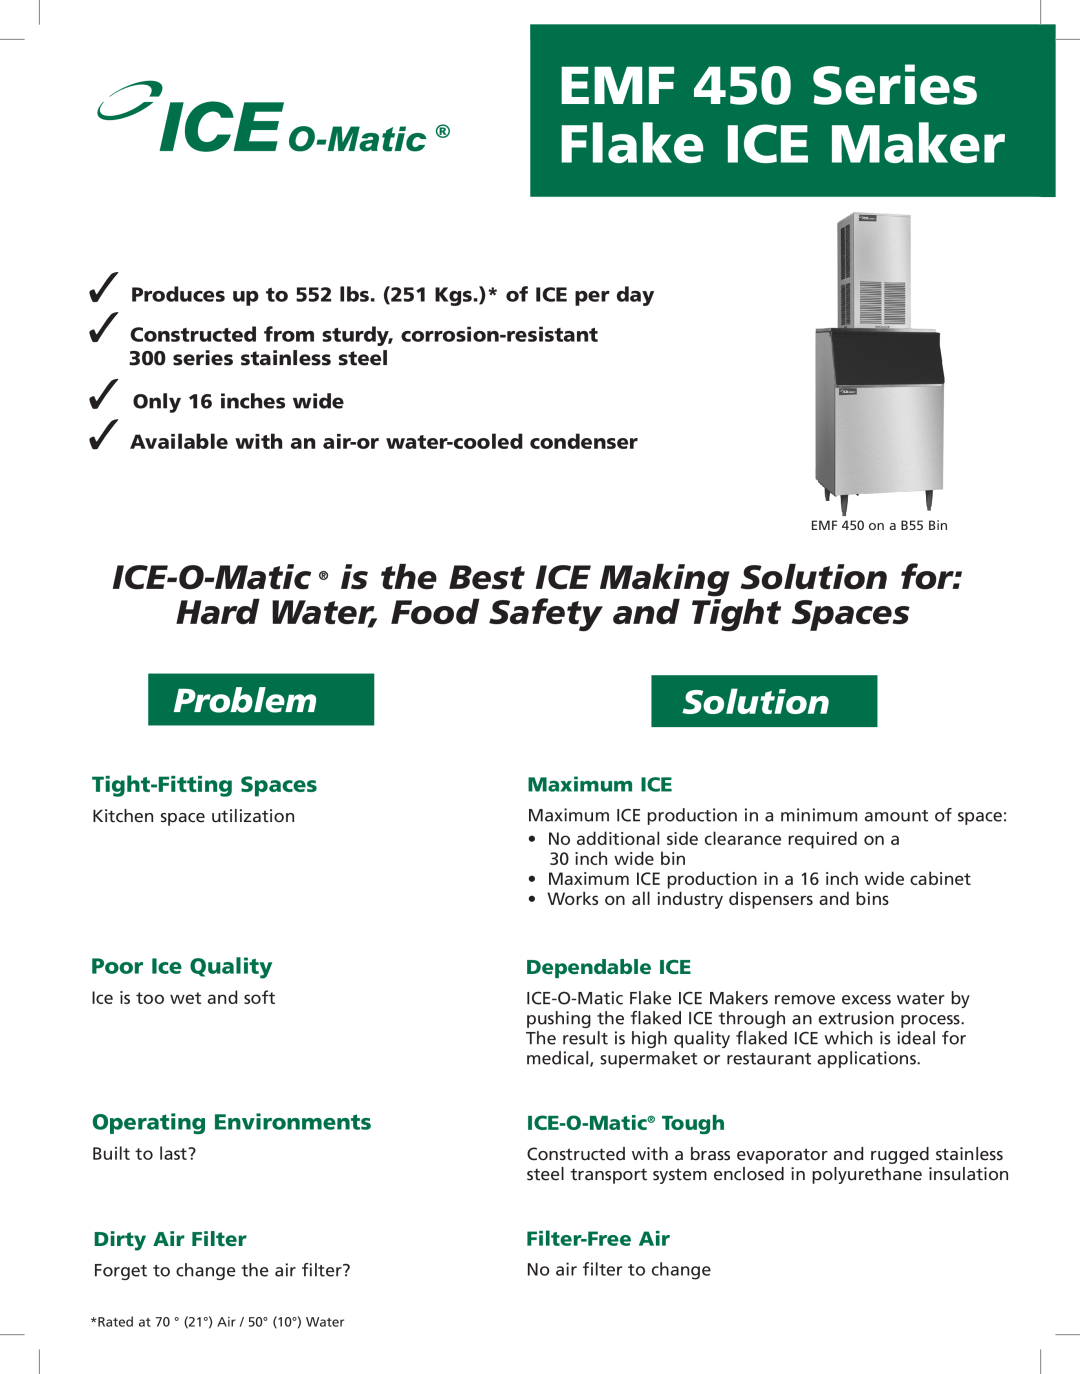 Ice-O-Matic EMF 450 Series manual Flake ICE Maker, Problem, Solution, Tight-FittingSpaces, Poor Ice Quality, Maximum ICE 